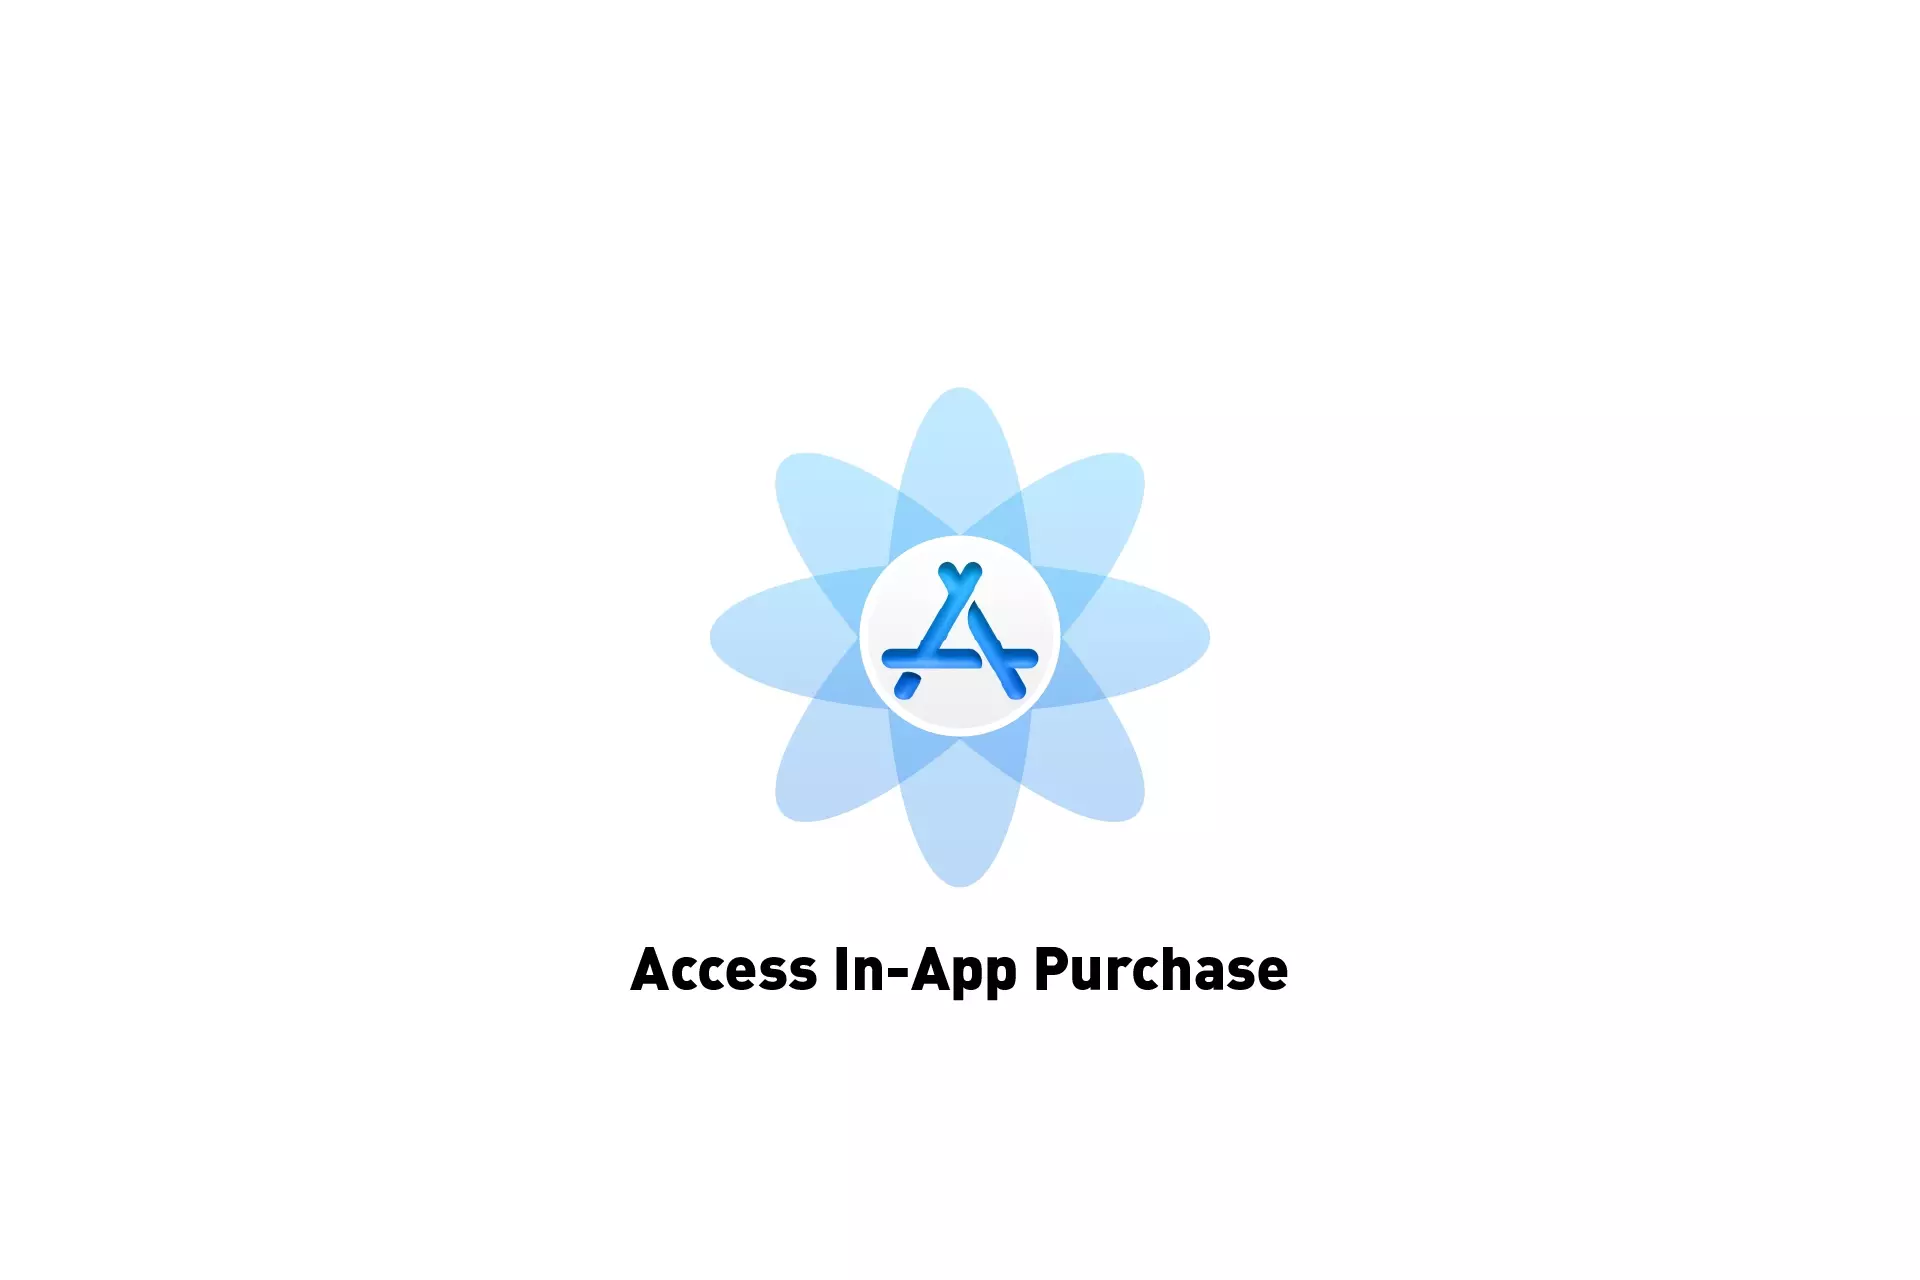 A flower that represents App Store Connect with the text "Access In-App Purchases" beneath it.